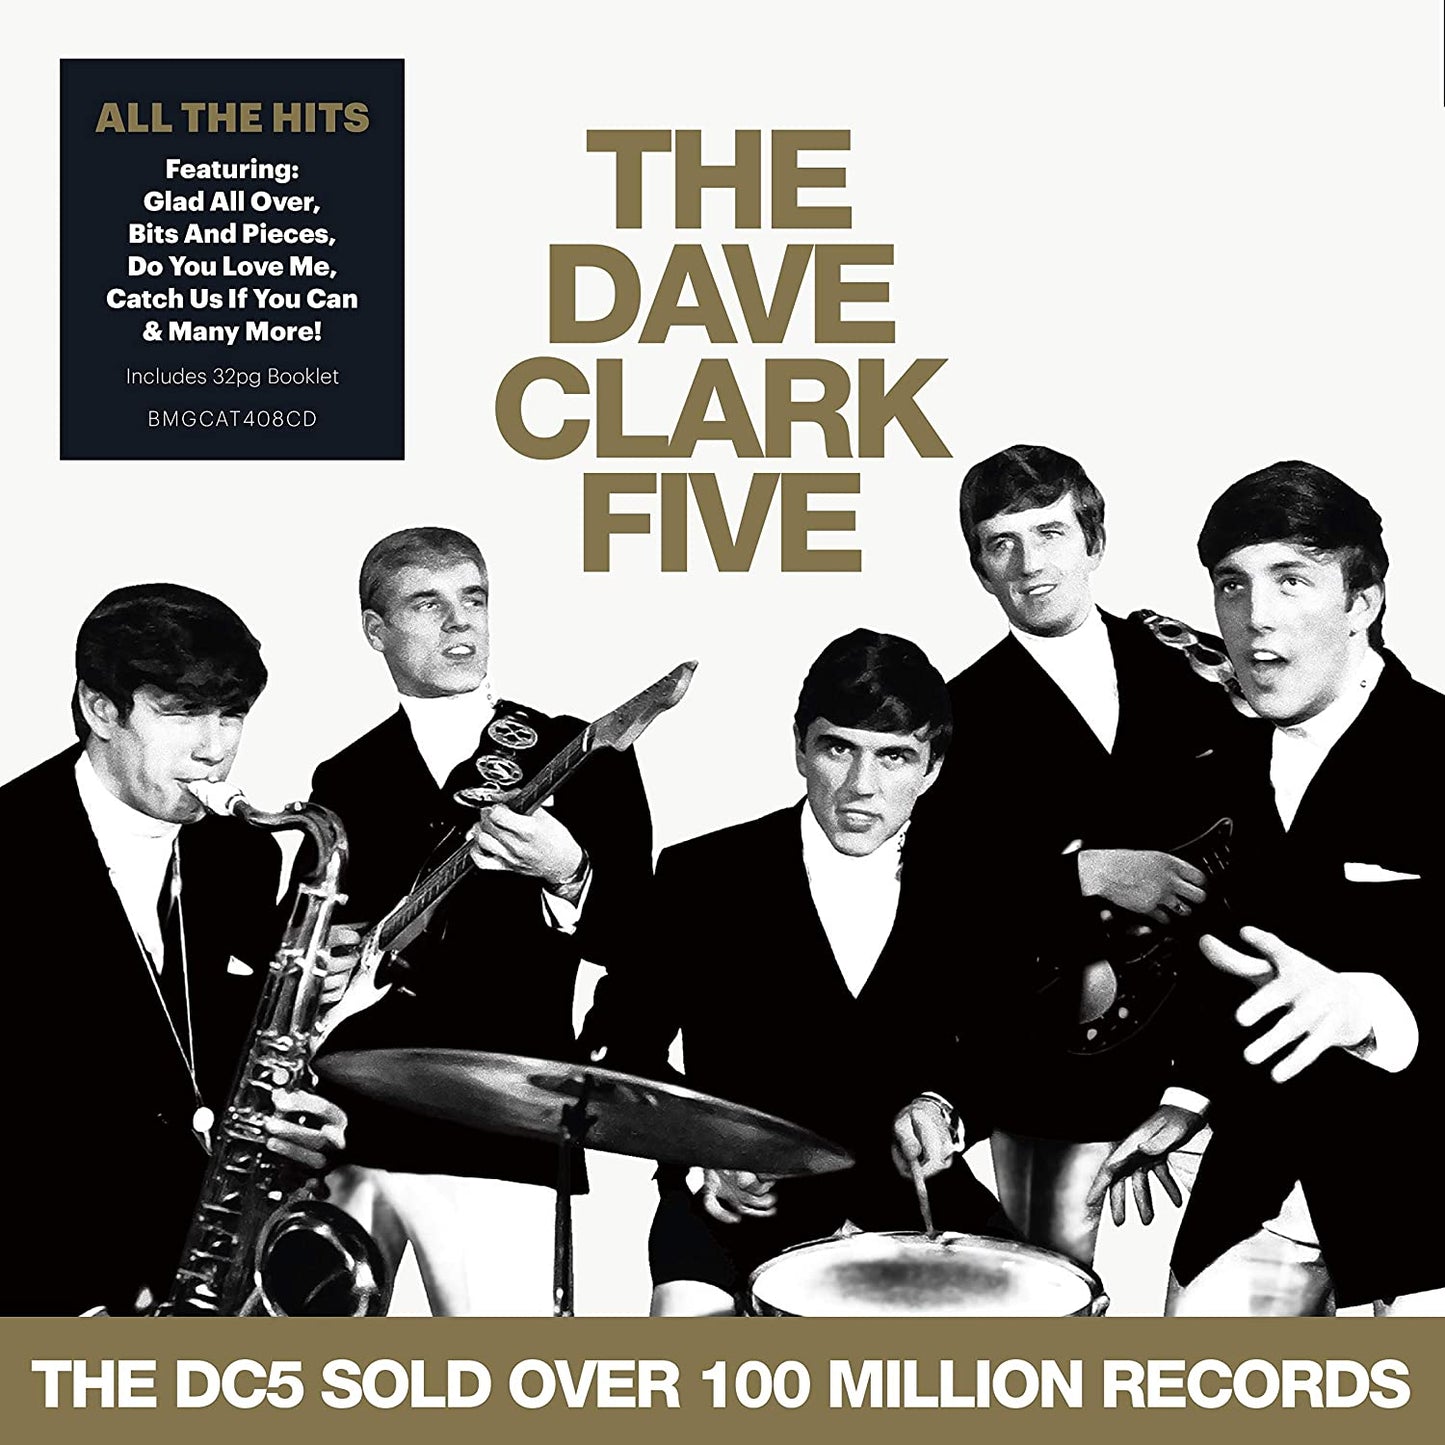 THE DAVE CLARK FIVE - ALL THE HITS - VINYL LP